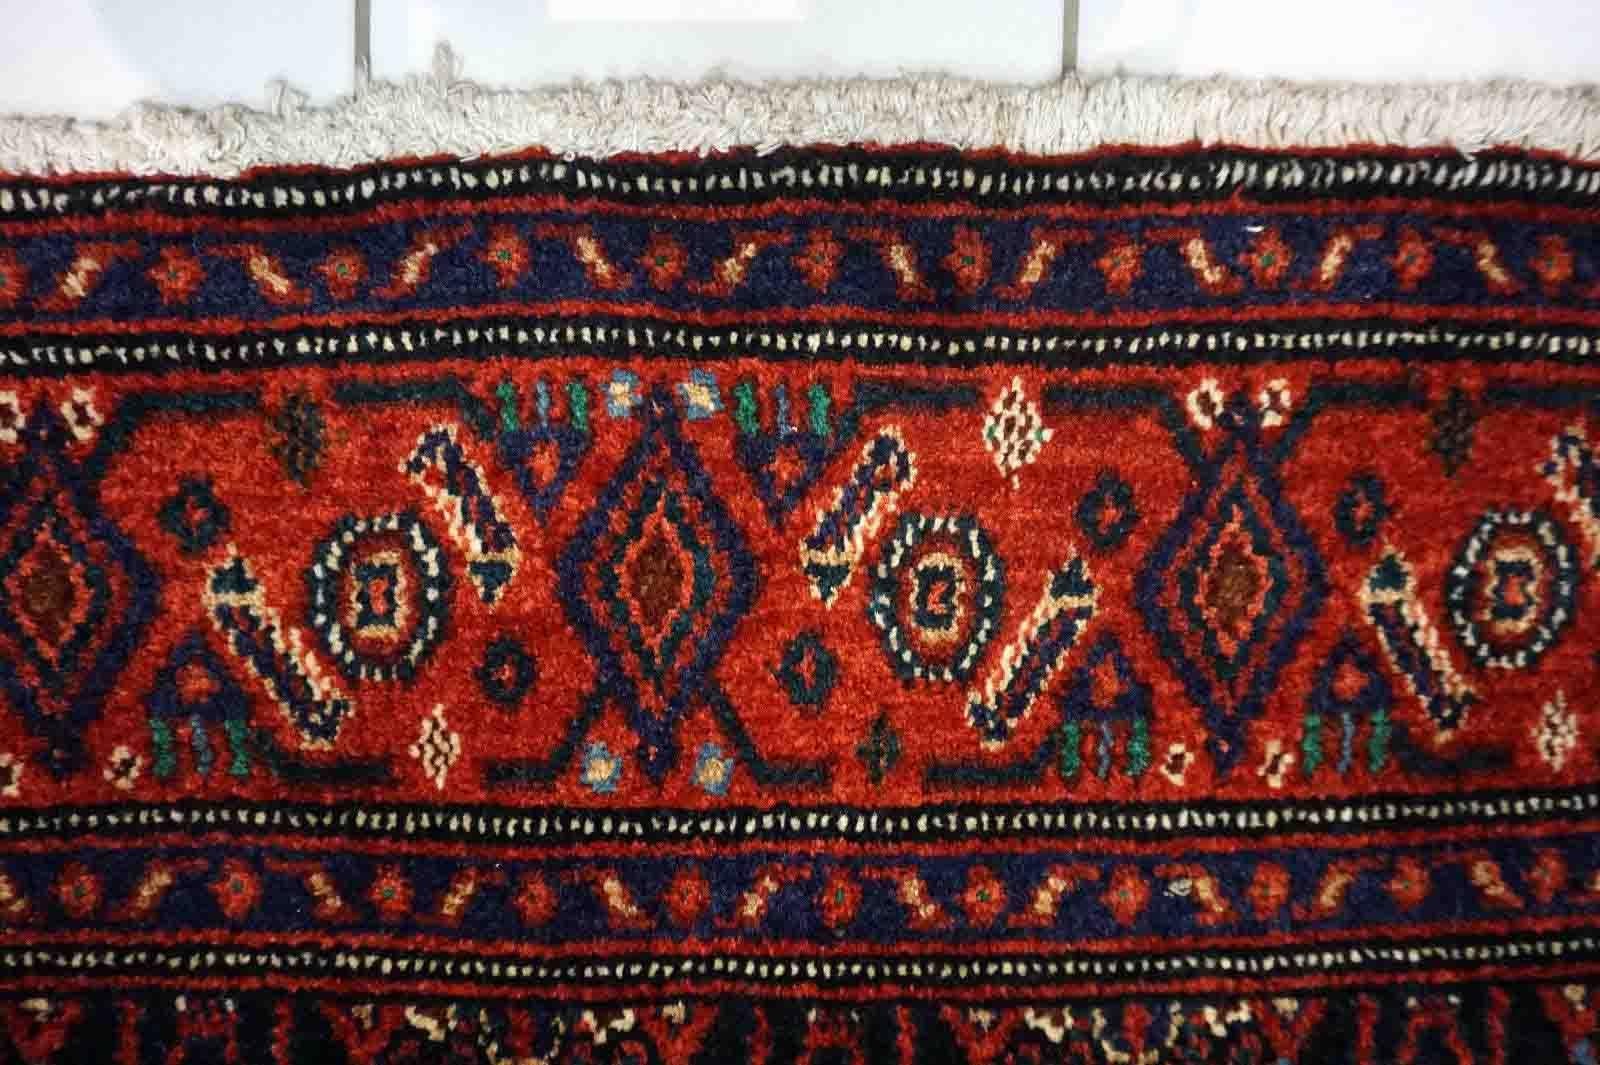 Handmade vintage Senneh rug in kele size and traditional design. The rug is from the end of 20th century in original good condition.

-condition: original good,

-circa: 1970s,

-size: 4.8' x 11.6' (149cm x 354cm),

-material: